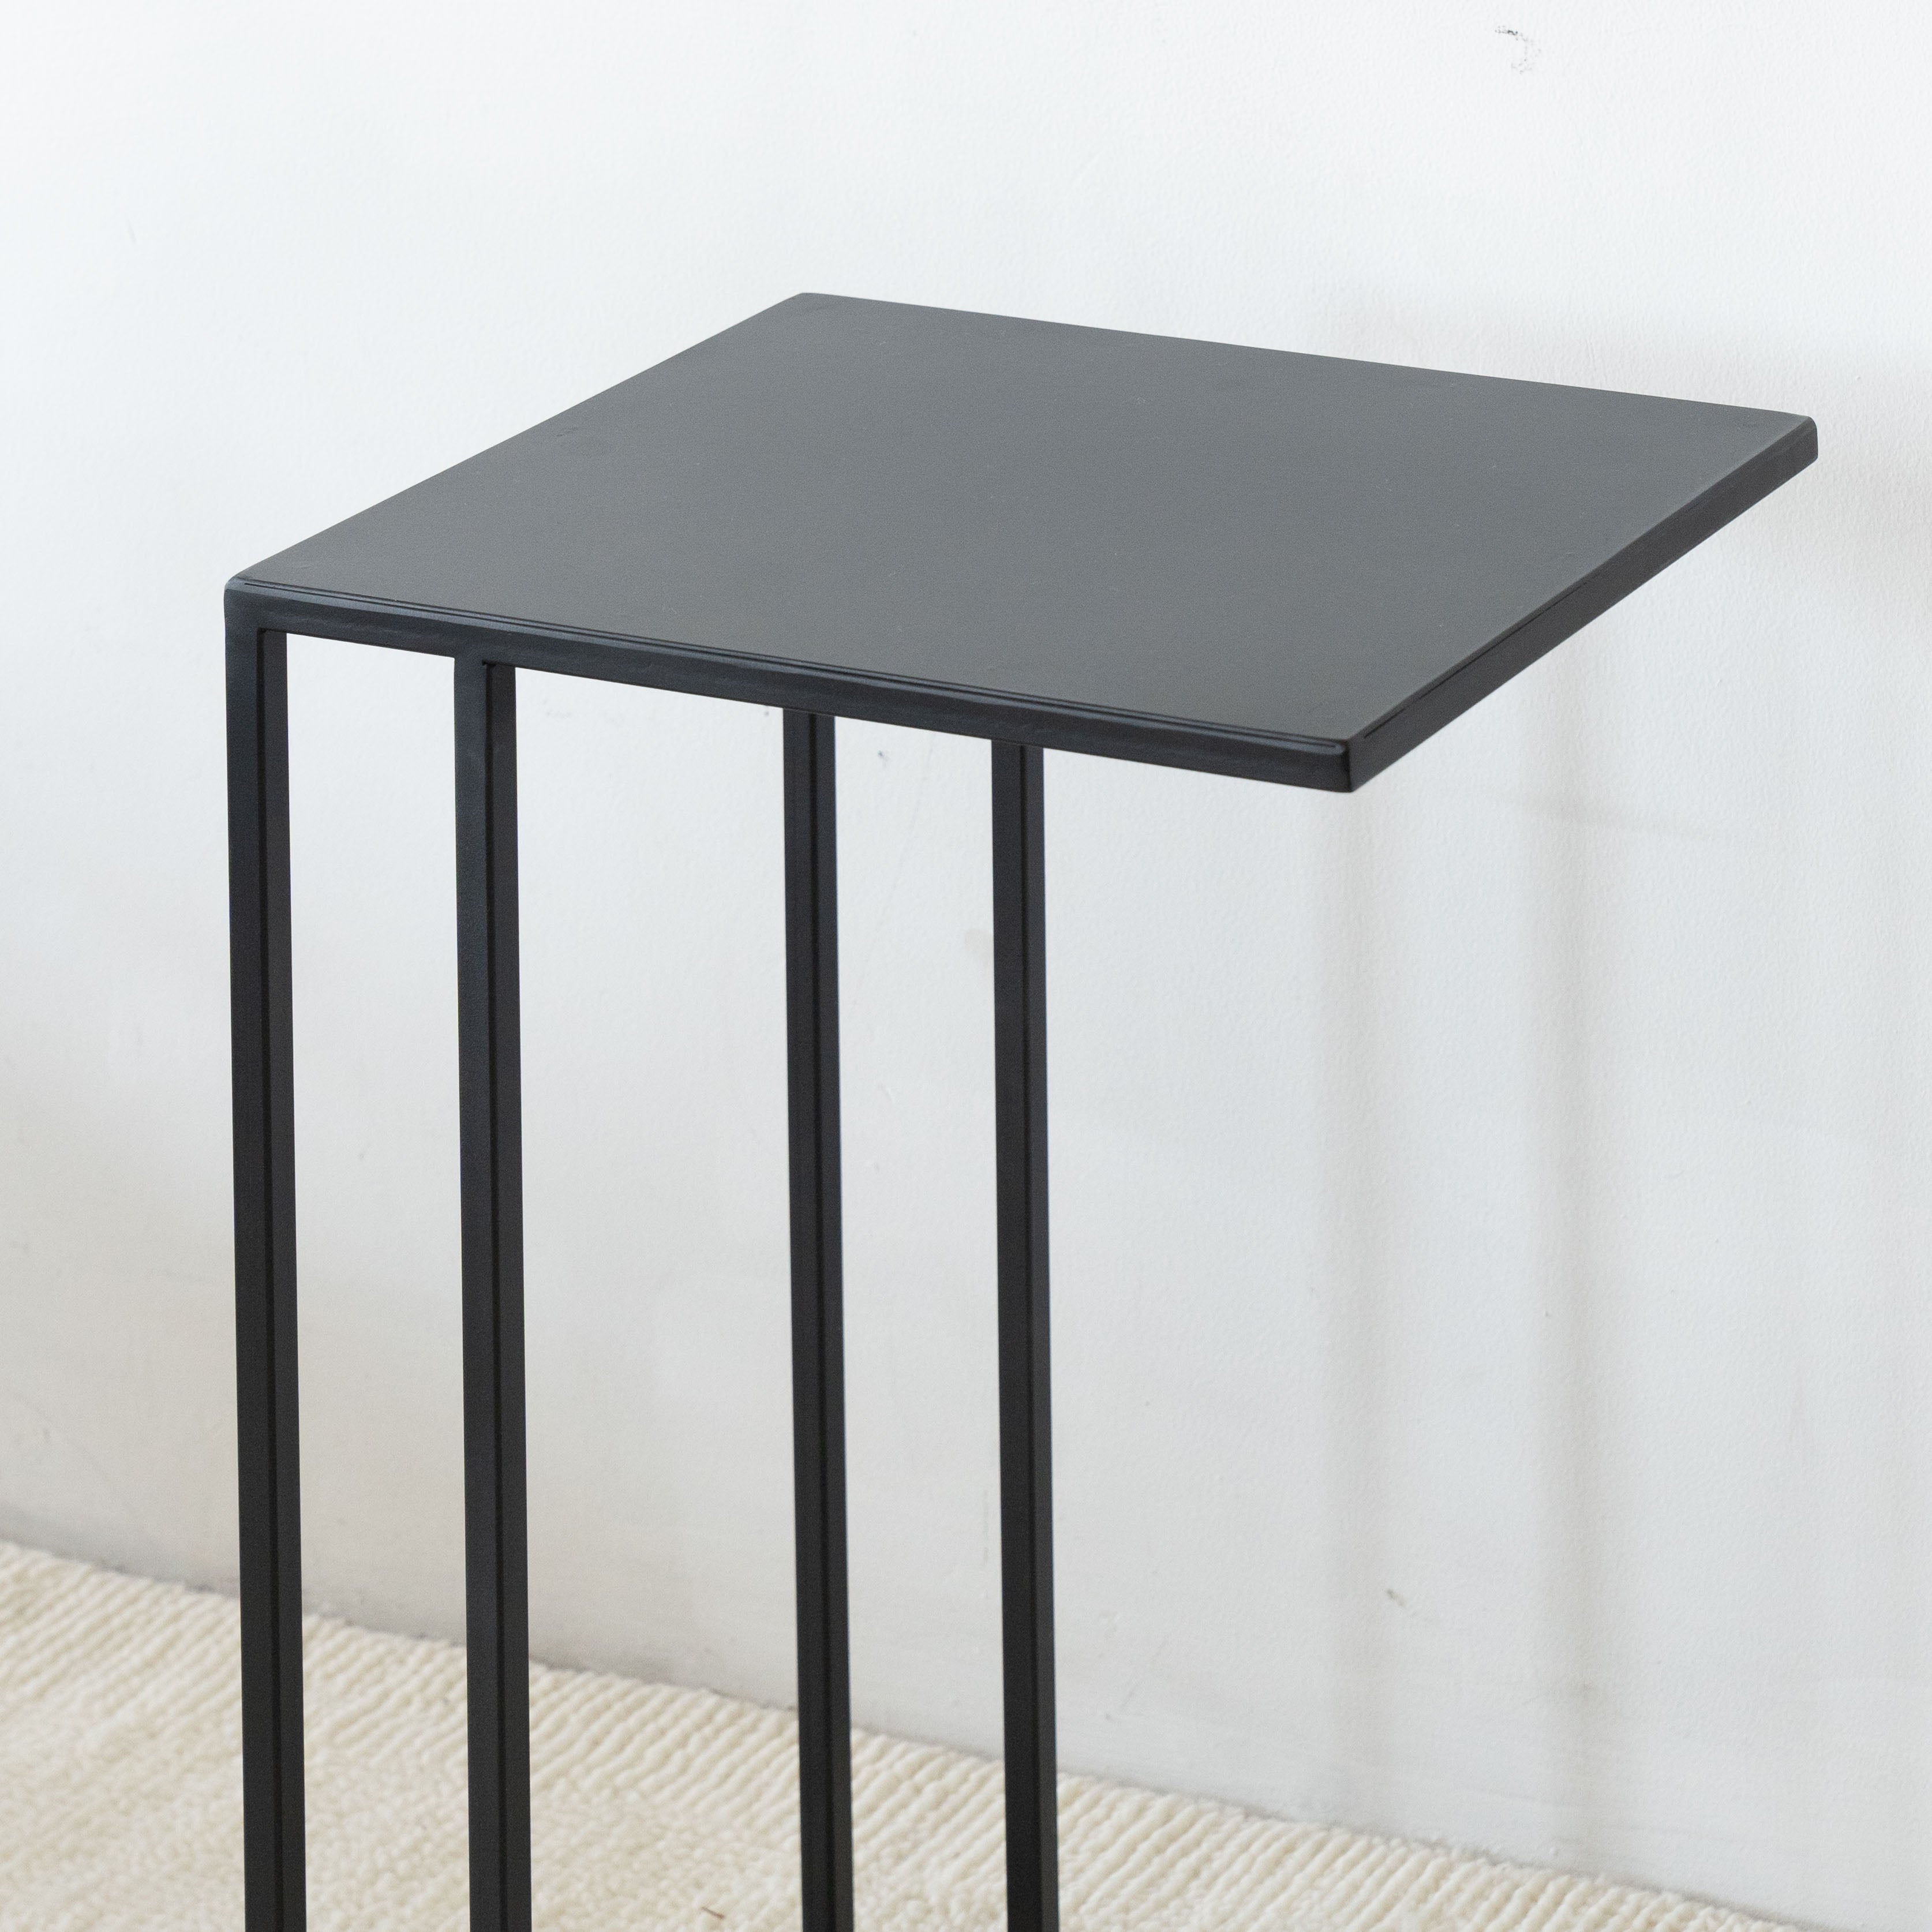 Monochrome Side Table C-Shape - Wood and Steel Furnitures